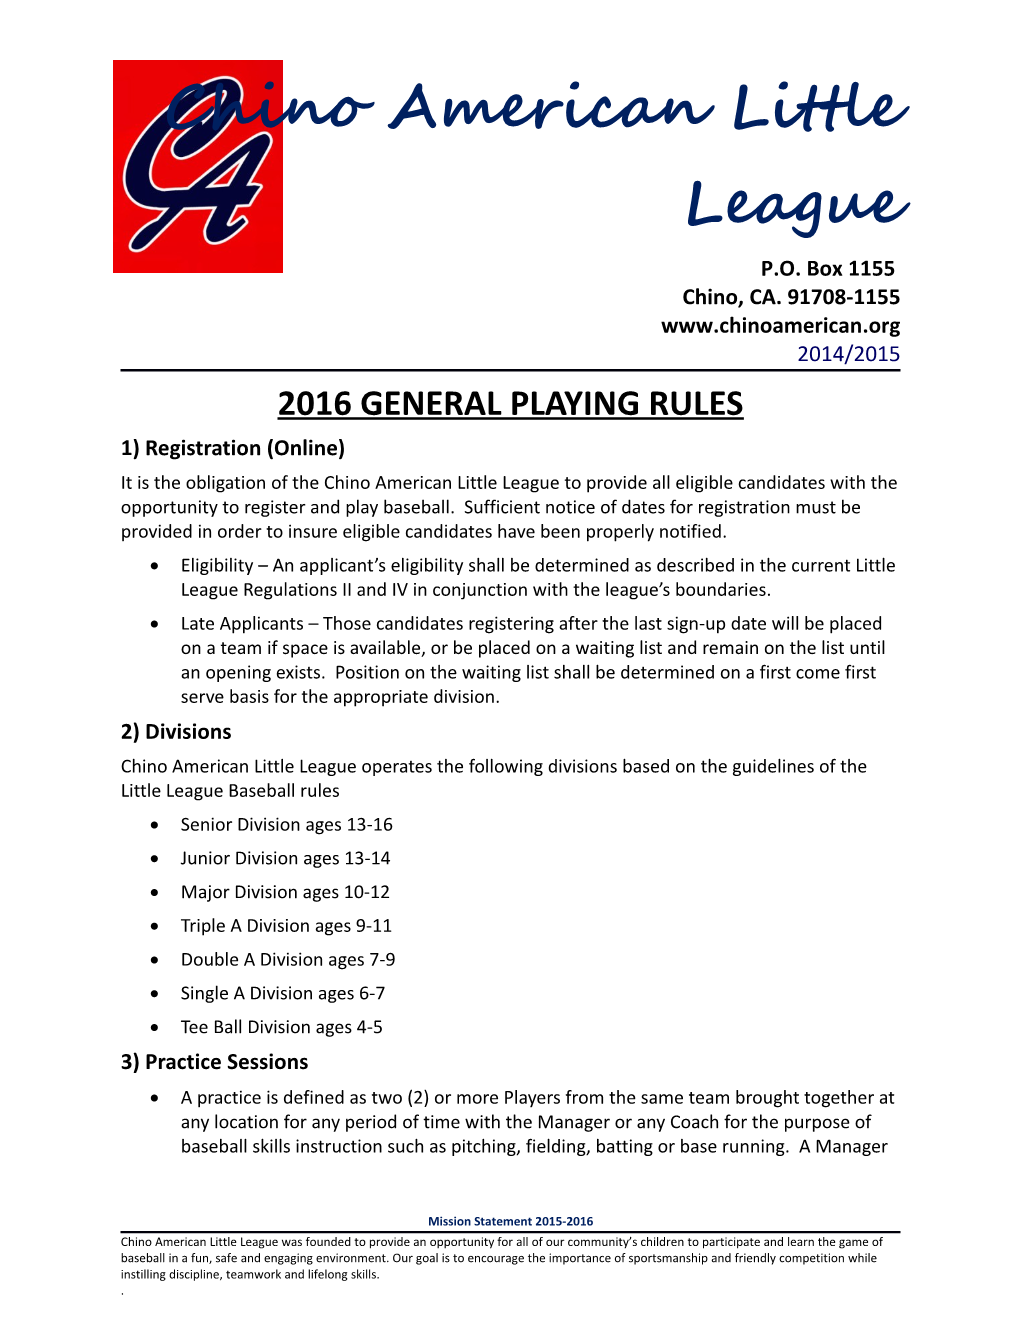 2016 General Playing Rules